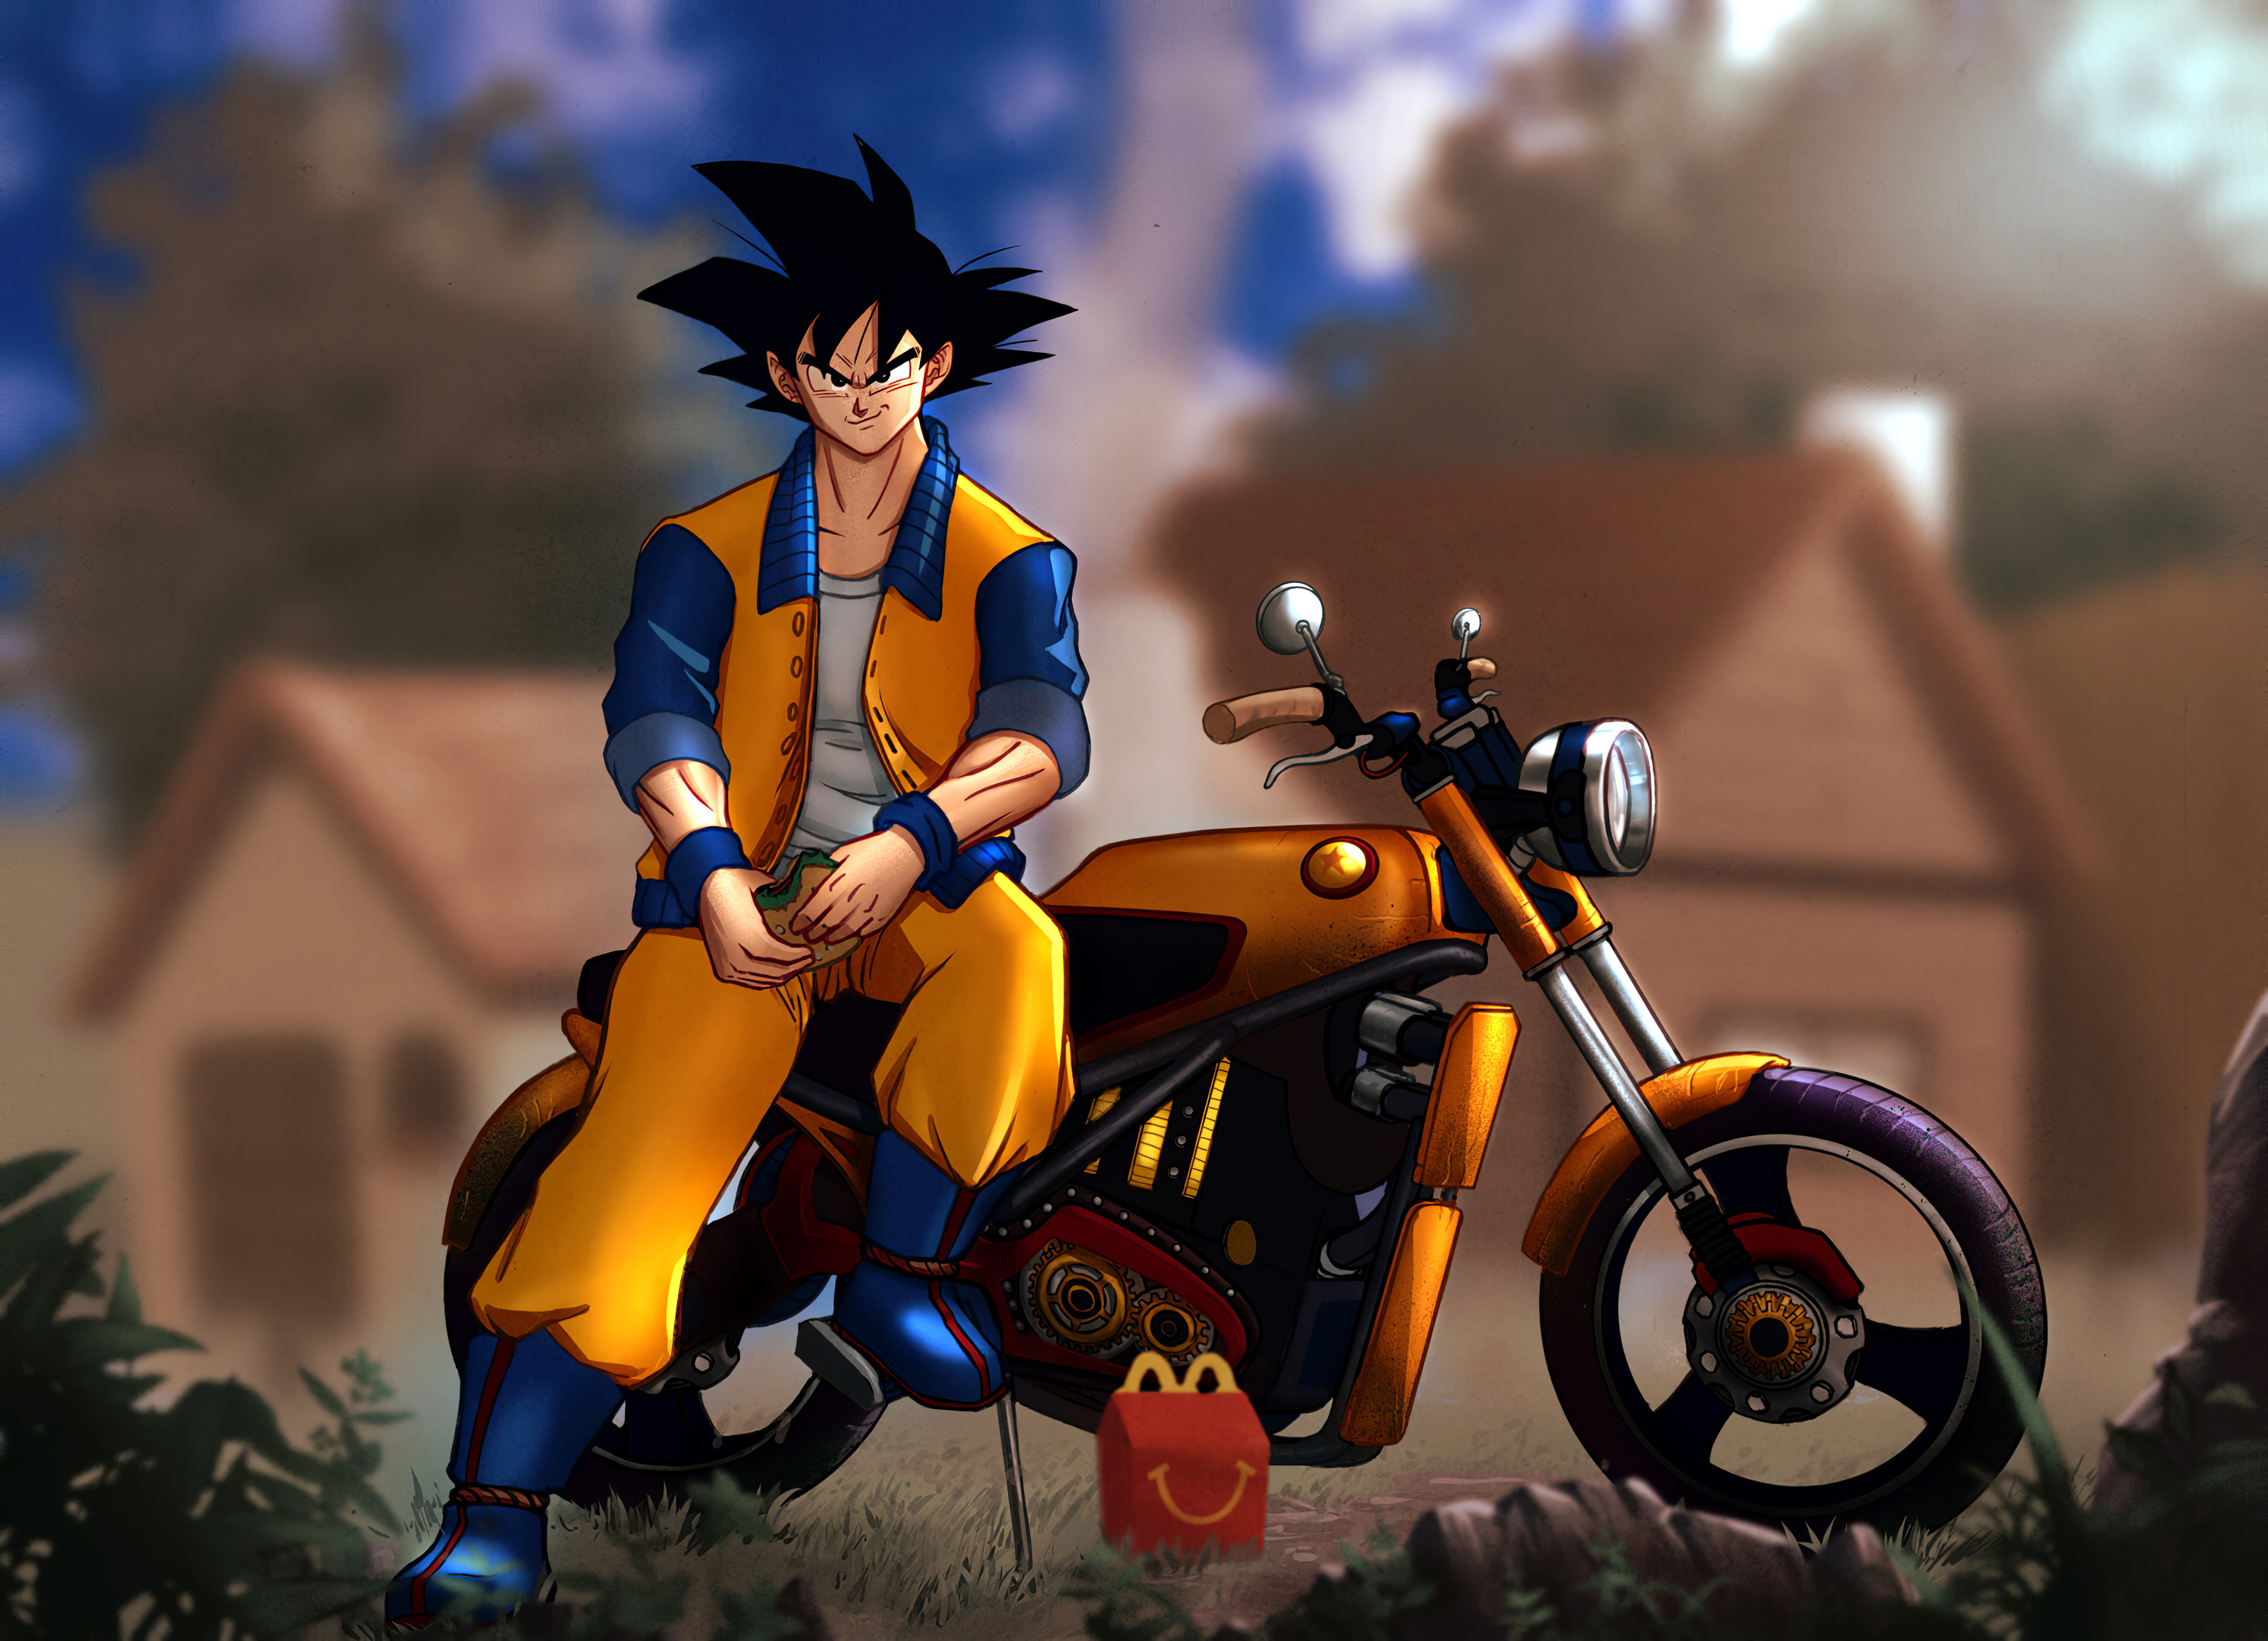 25 Best Motorcycles Anime of All Time Ranked